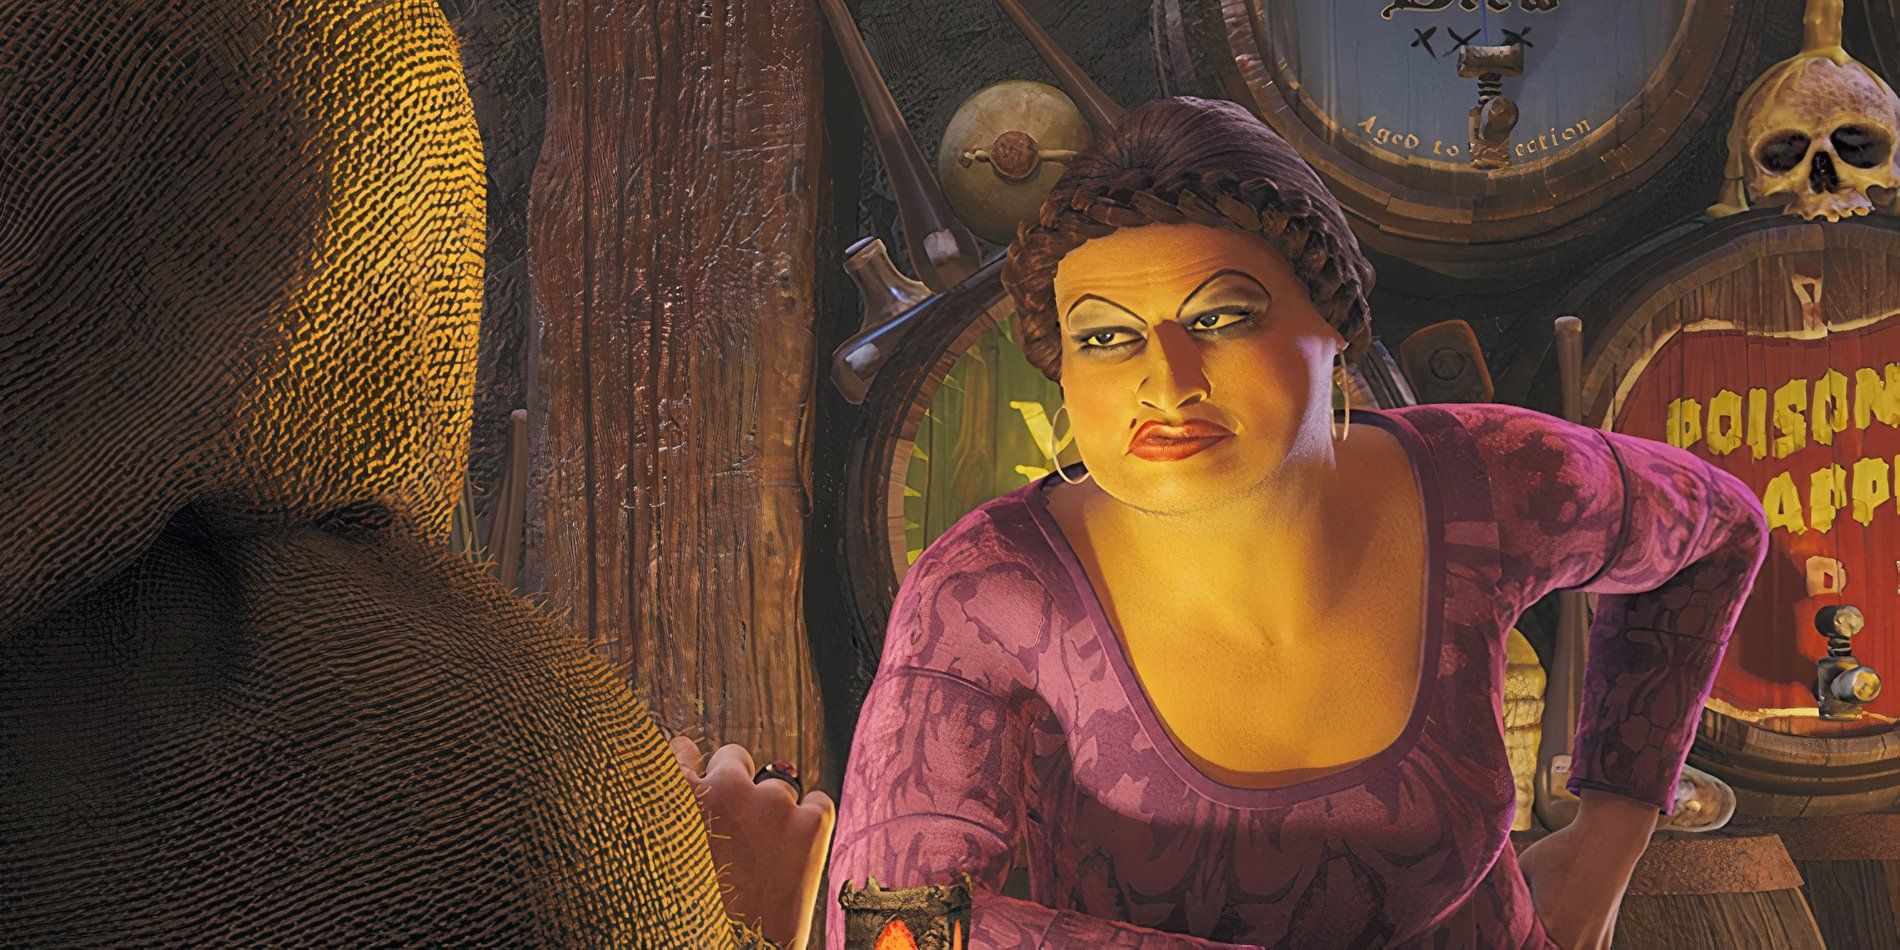 Doris leans forward on a bar while speaking with someone in Shrek